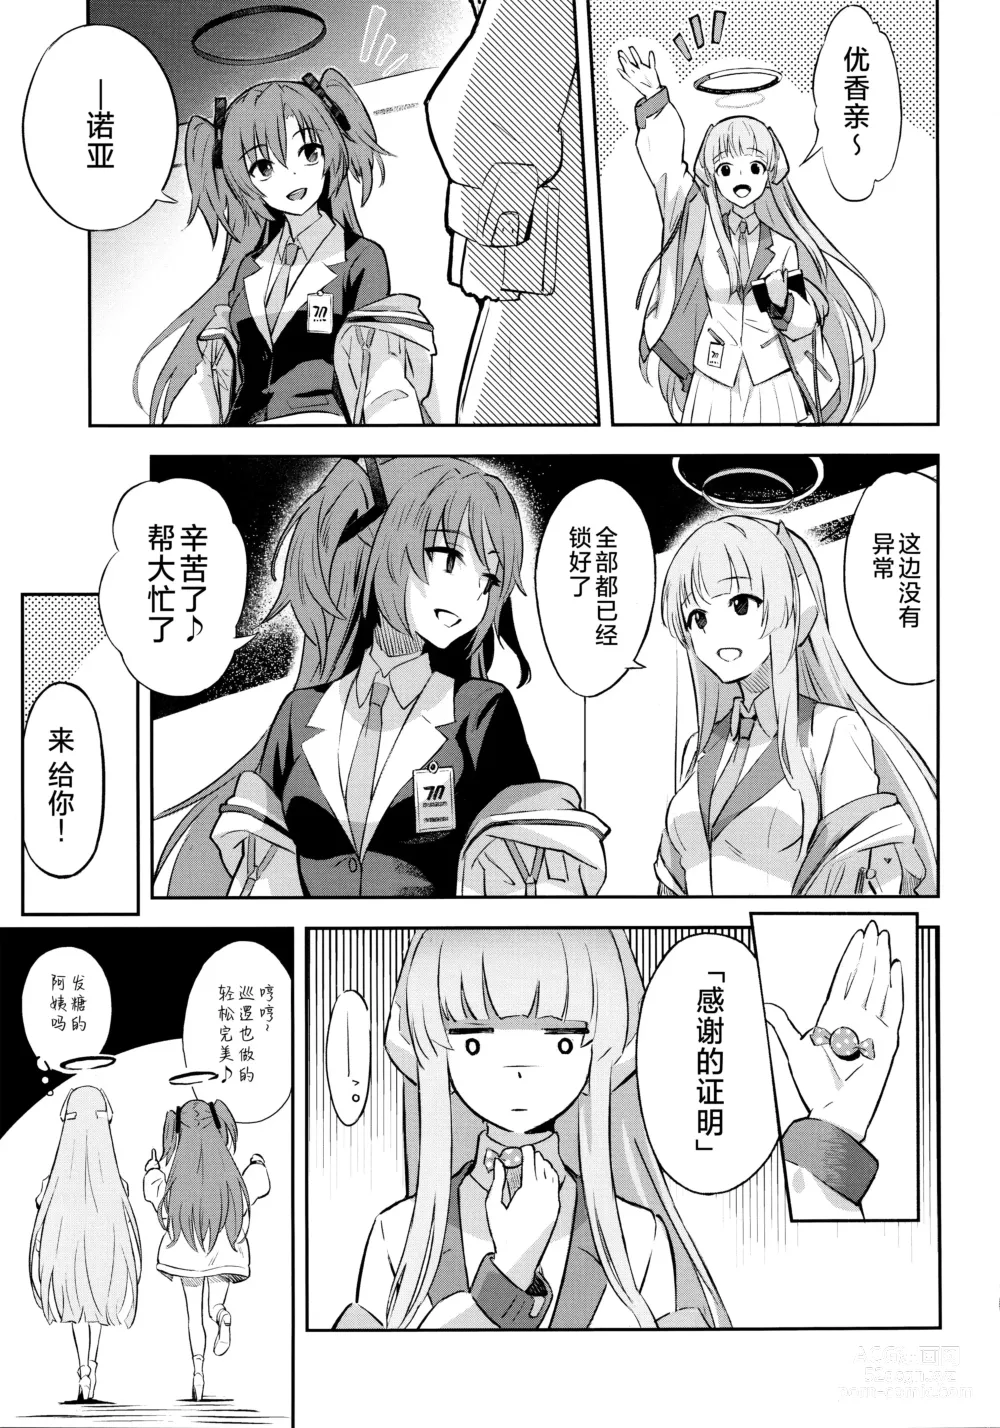 Page 10 of doujinshi 会长亲之恋